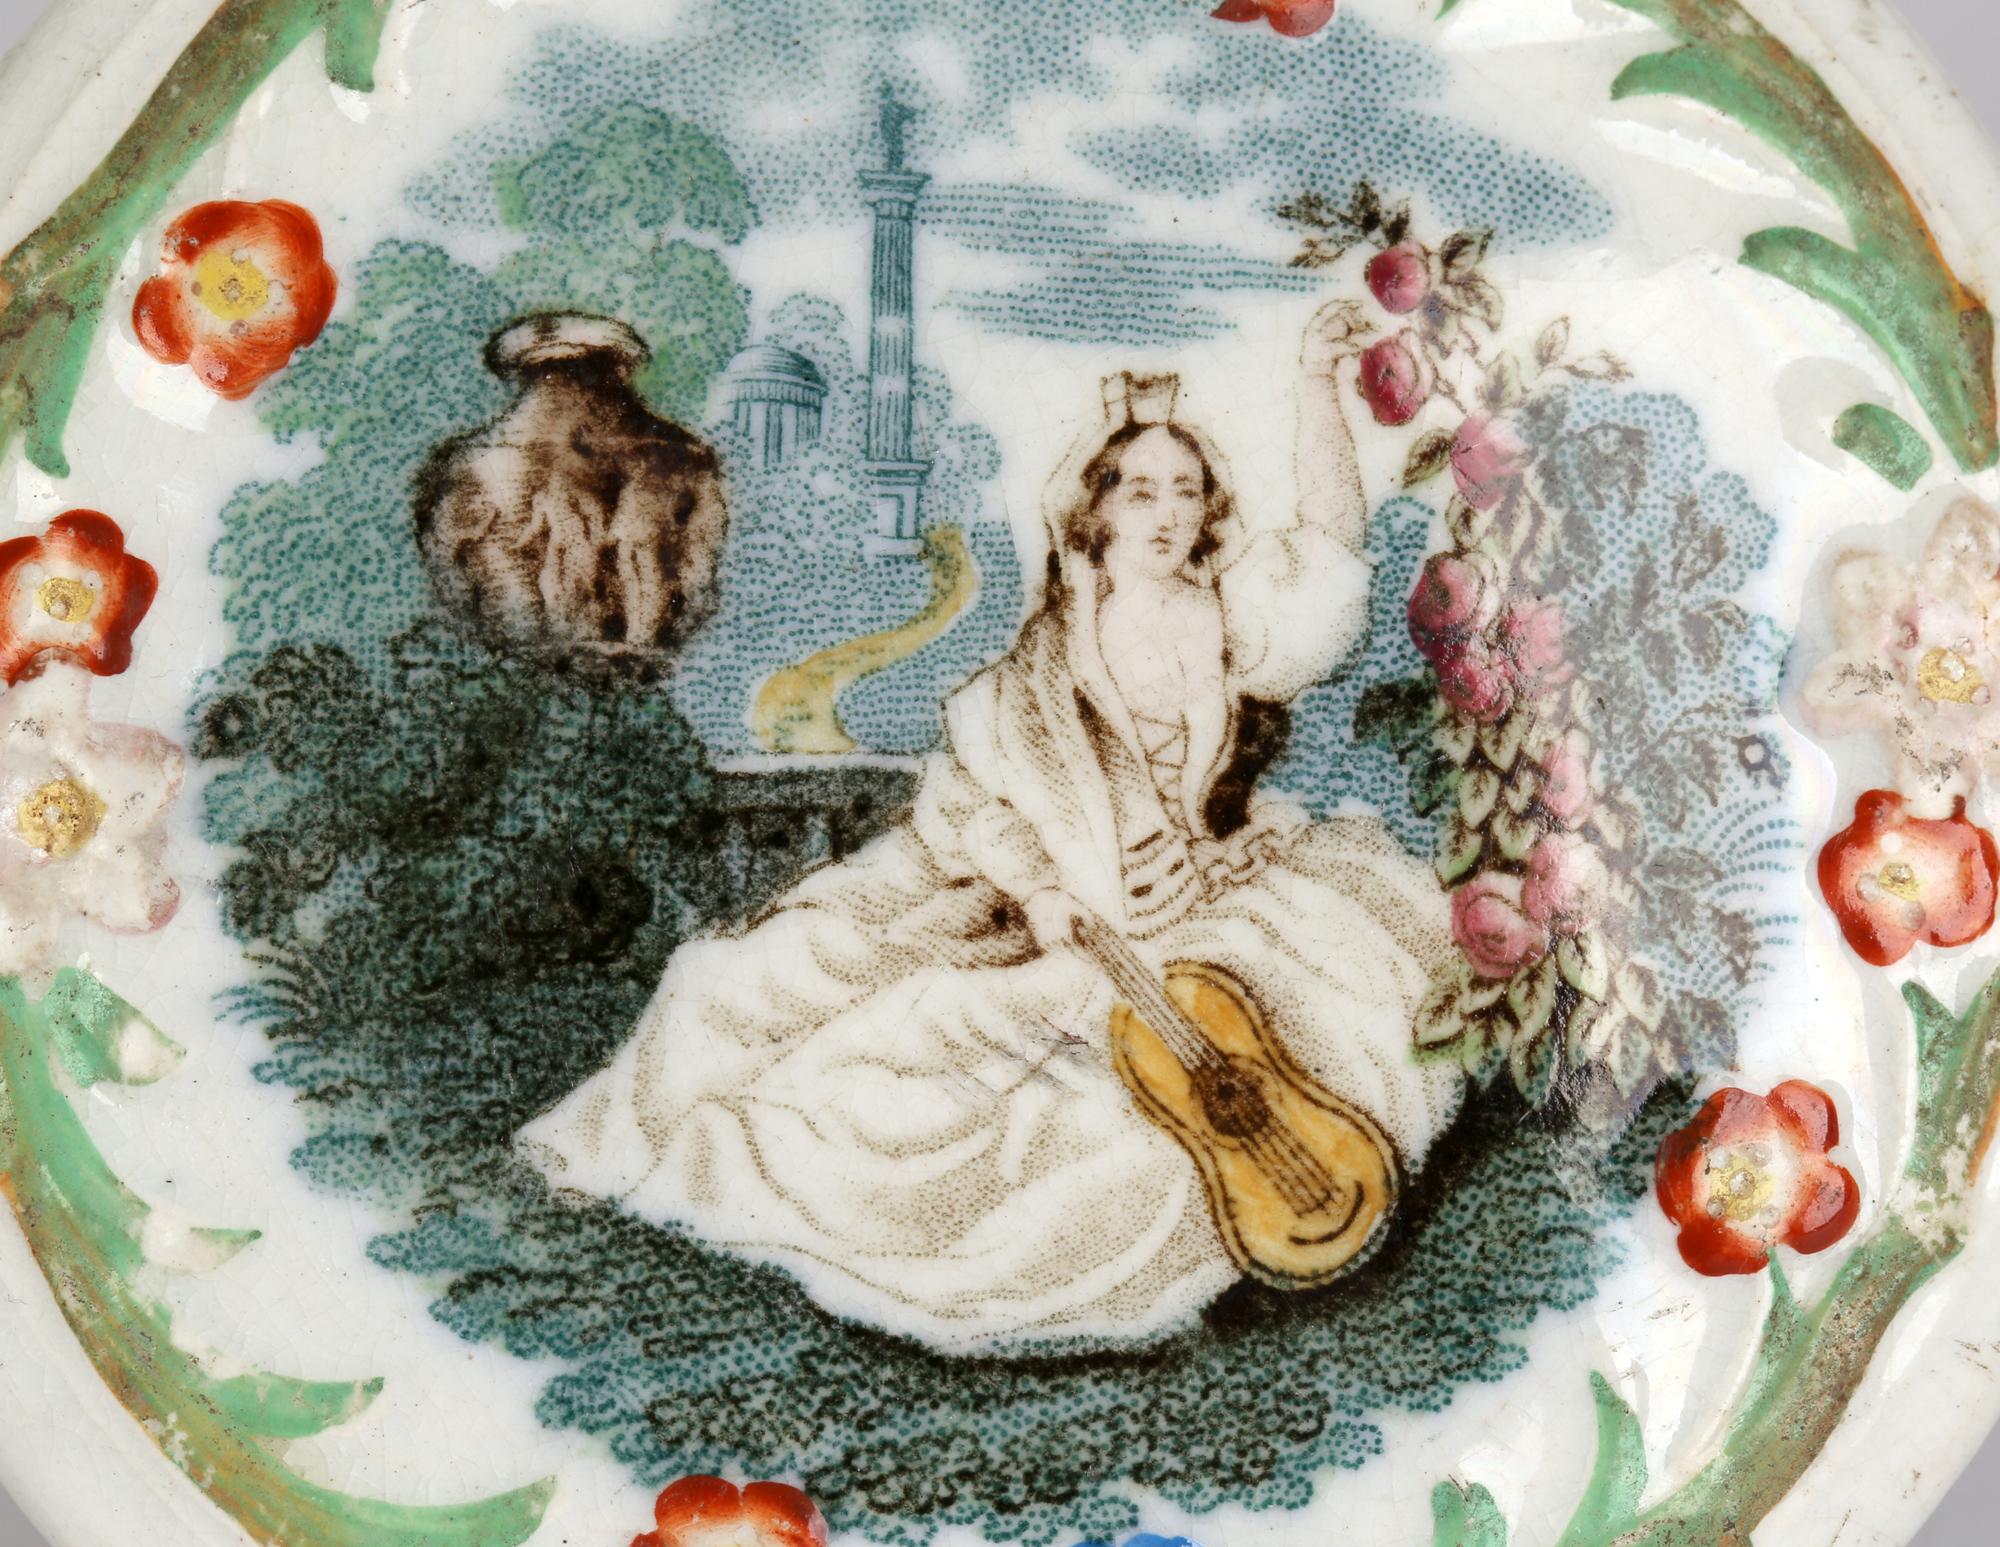 Pottery Jenny Lind Rare Printed and Hand Painted Pot Lid Attributed to Ridgway For Sale